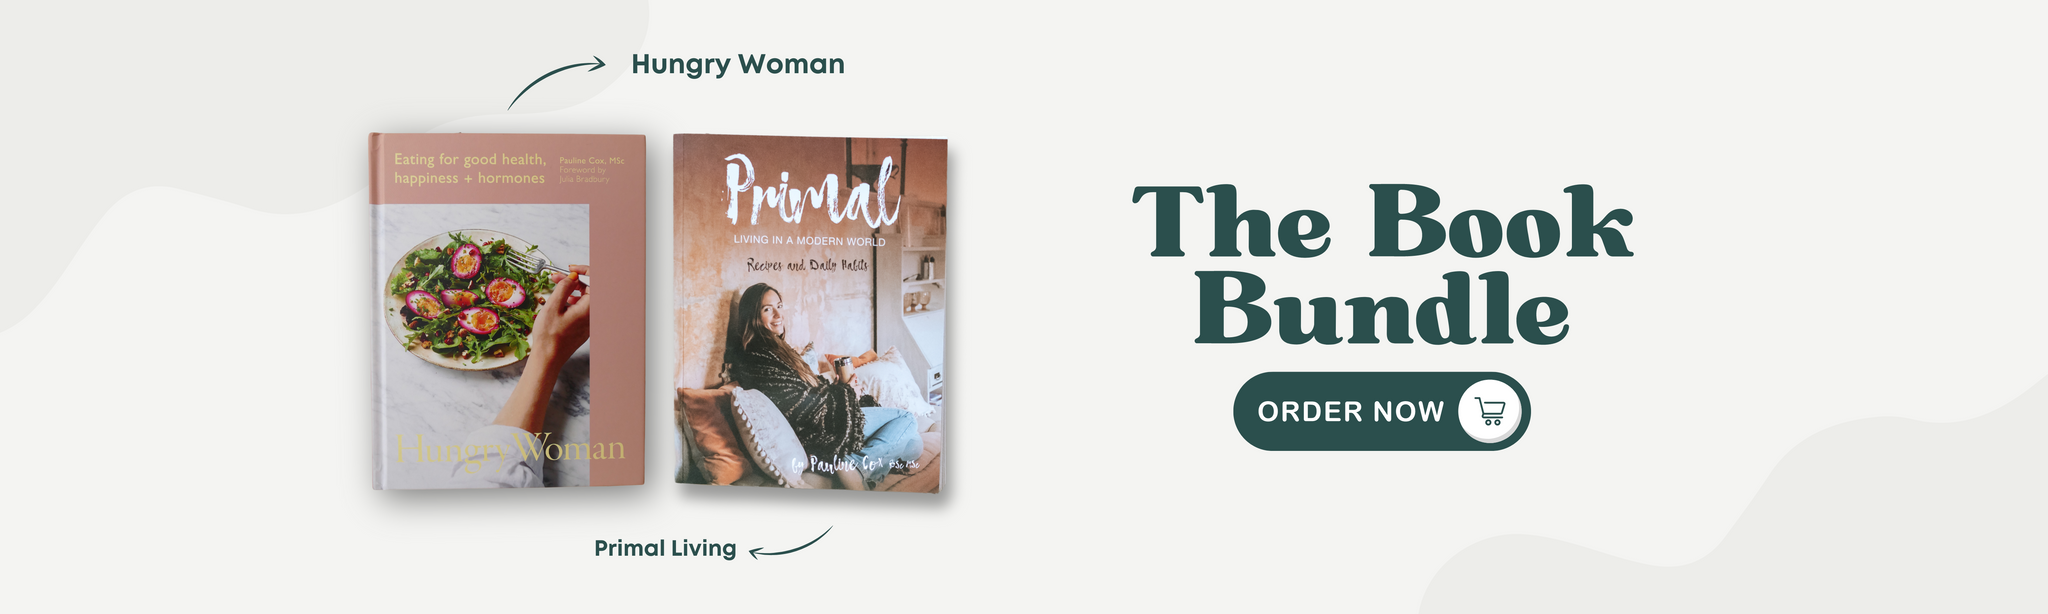 Hungry Woman by Pauline Cox and Primal Living By Pauline Cox Available as a Bundle at Sow & Arrow.